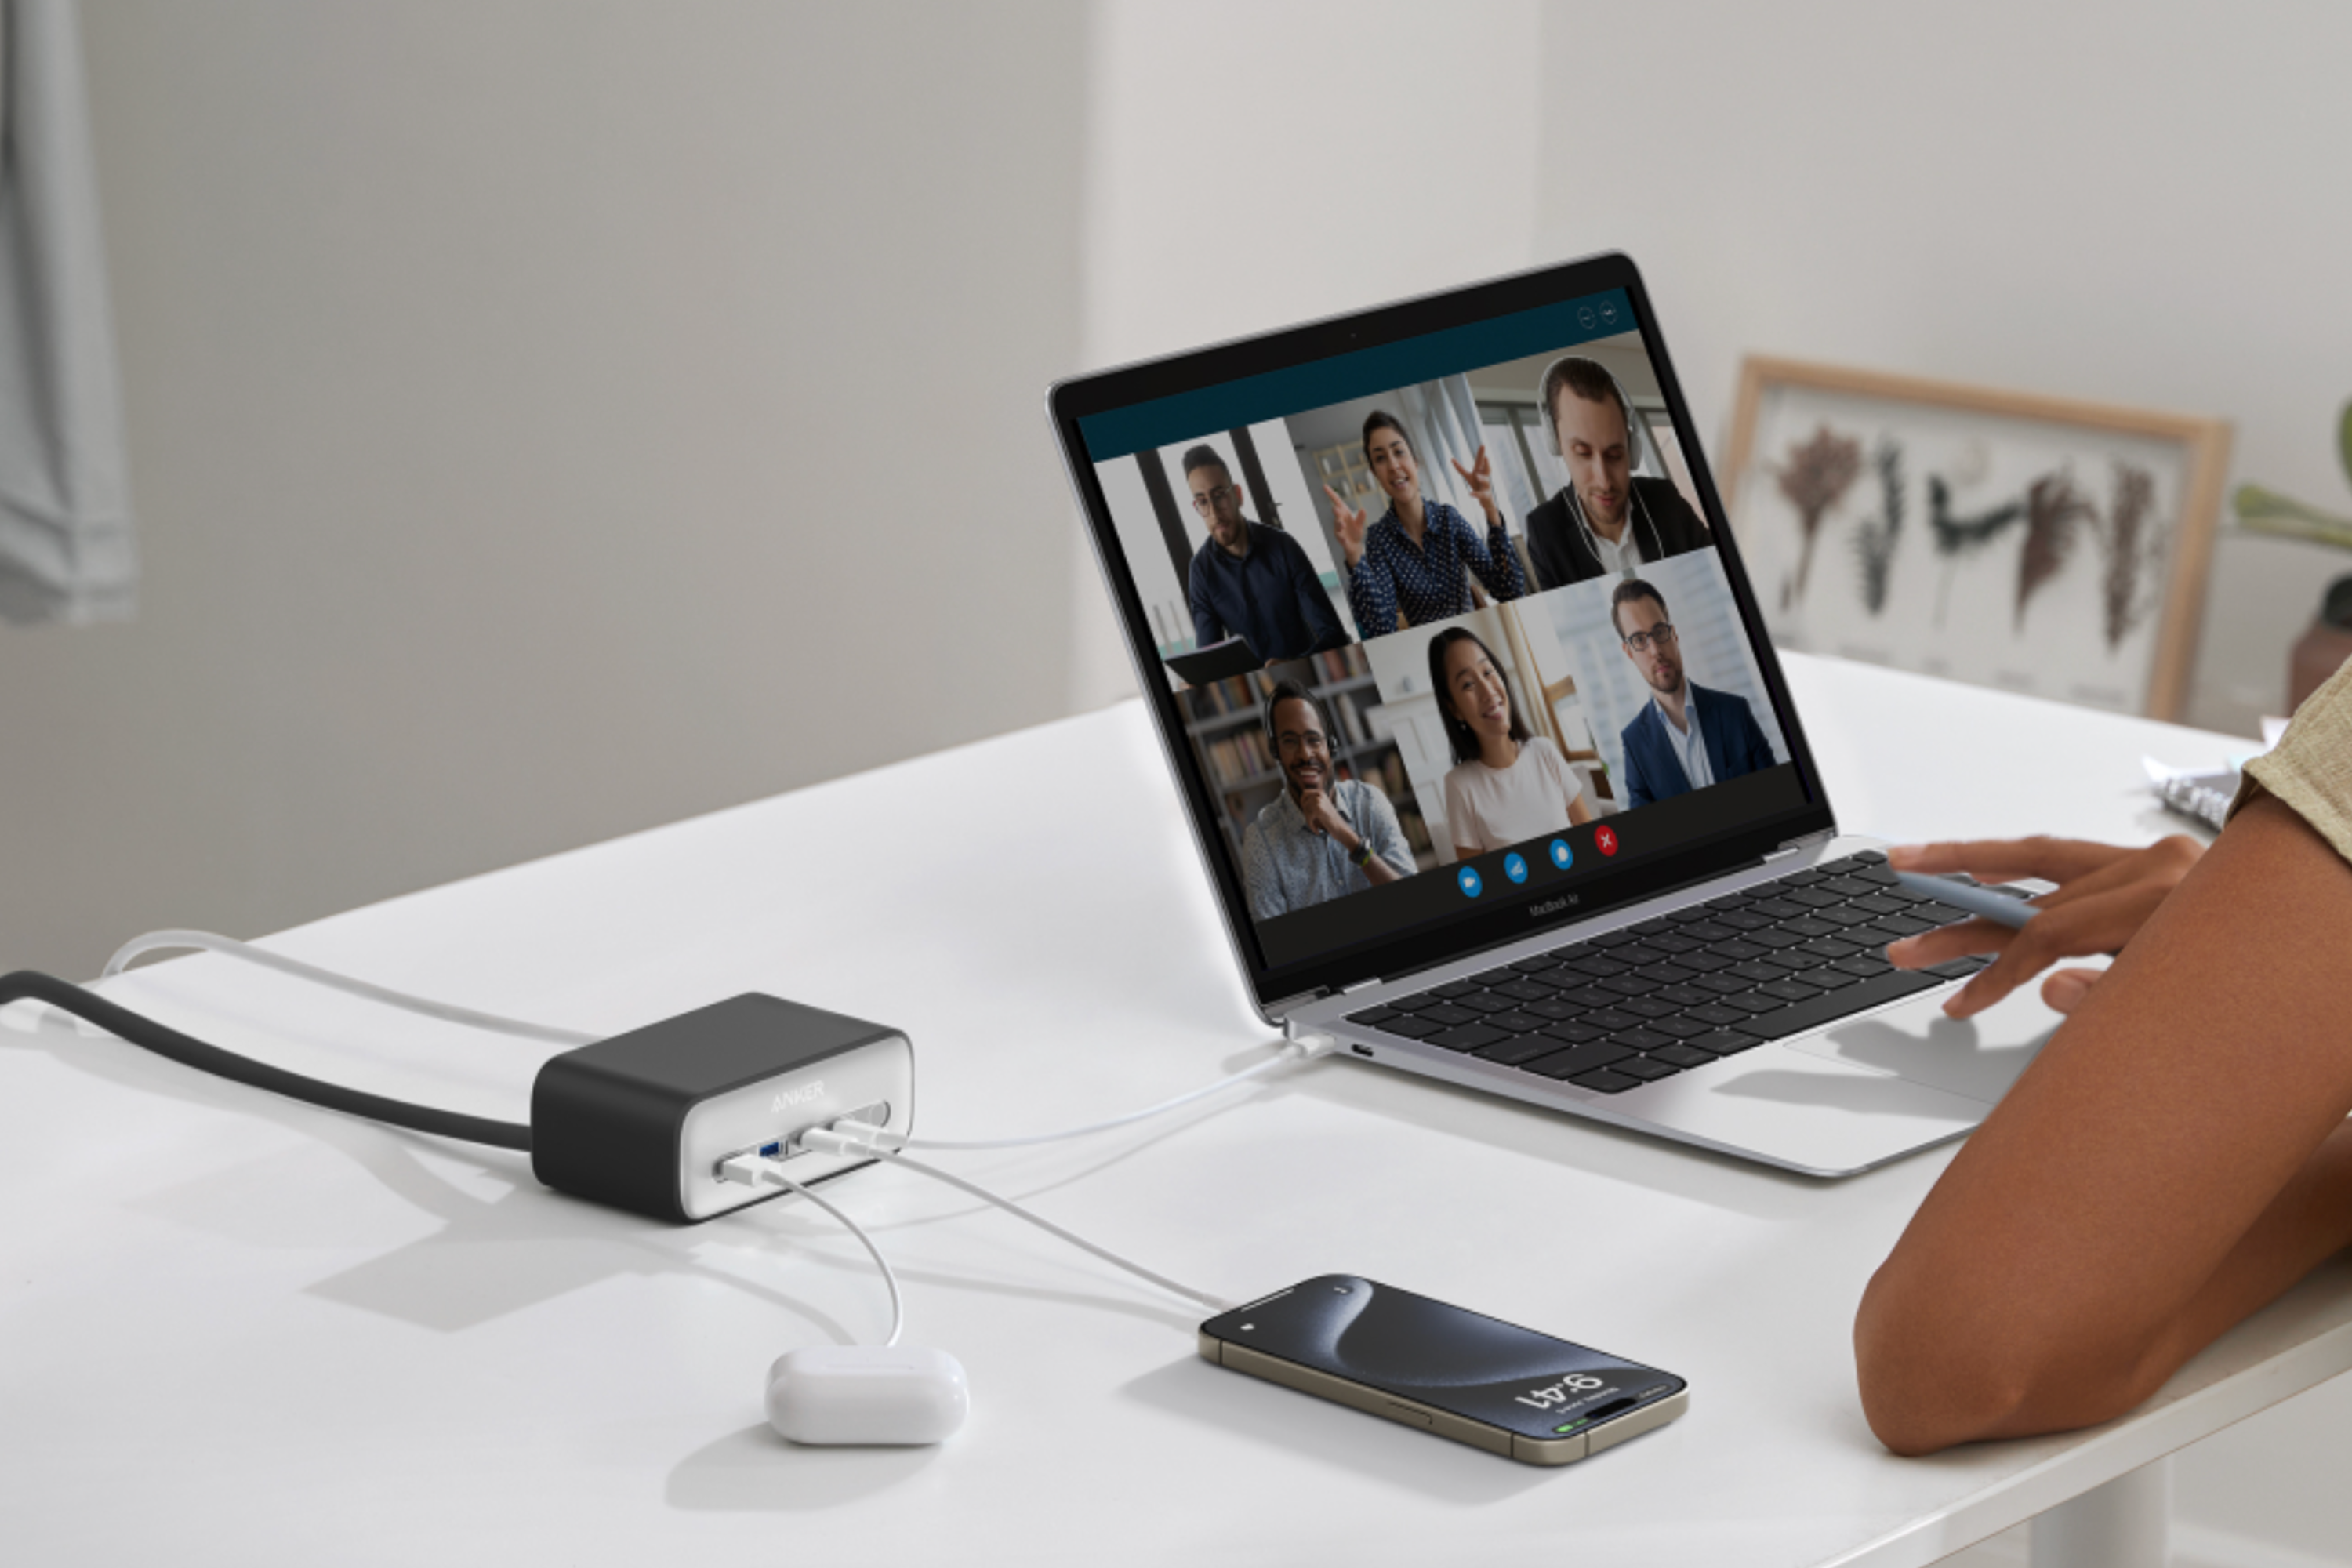 Anker 525 Charging Station on desk connected to laptop, smartphones and earbuds